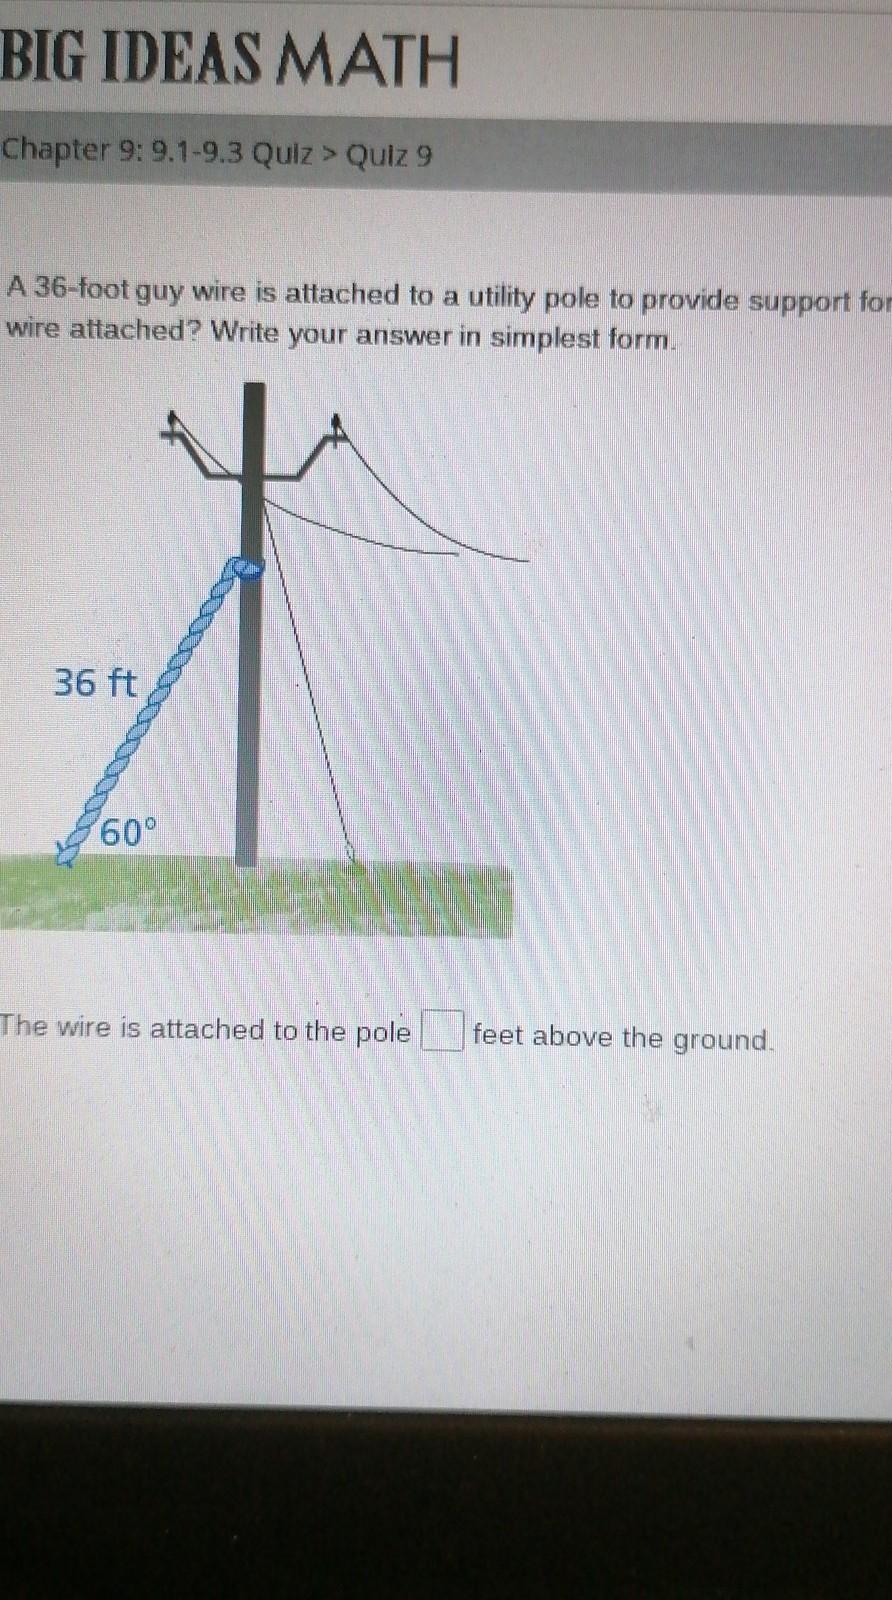 A 36-foot Guy Wire Is Attached To A Utility Pole To Provide Support For The Pole. The Wire Forms A 60